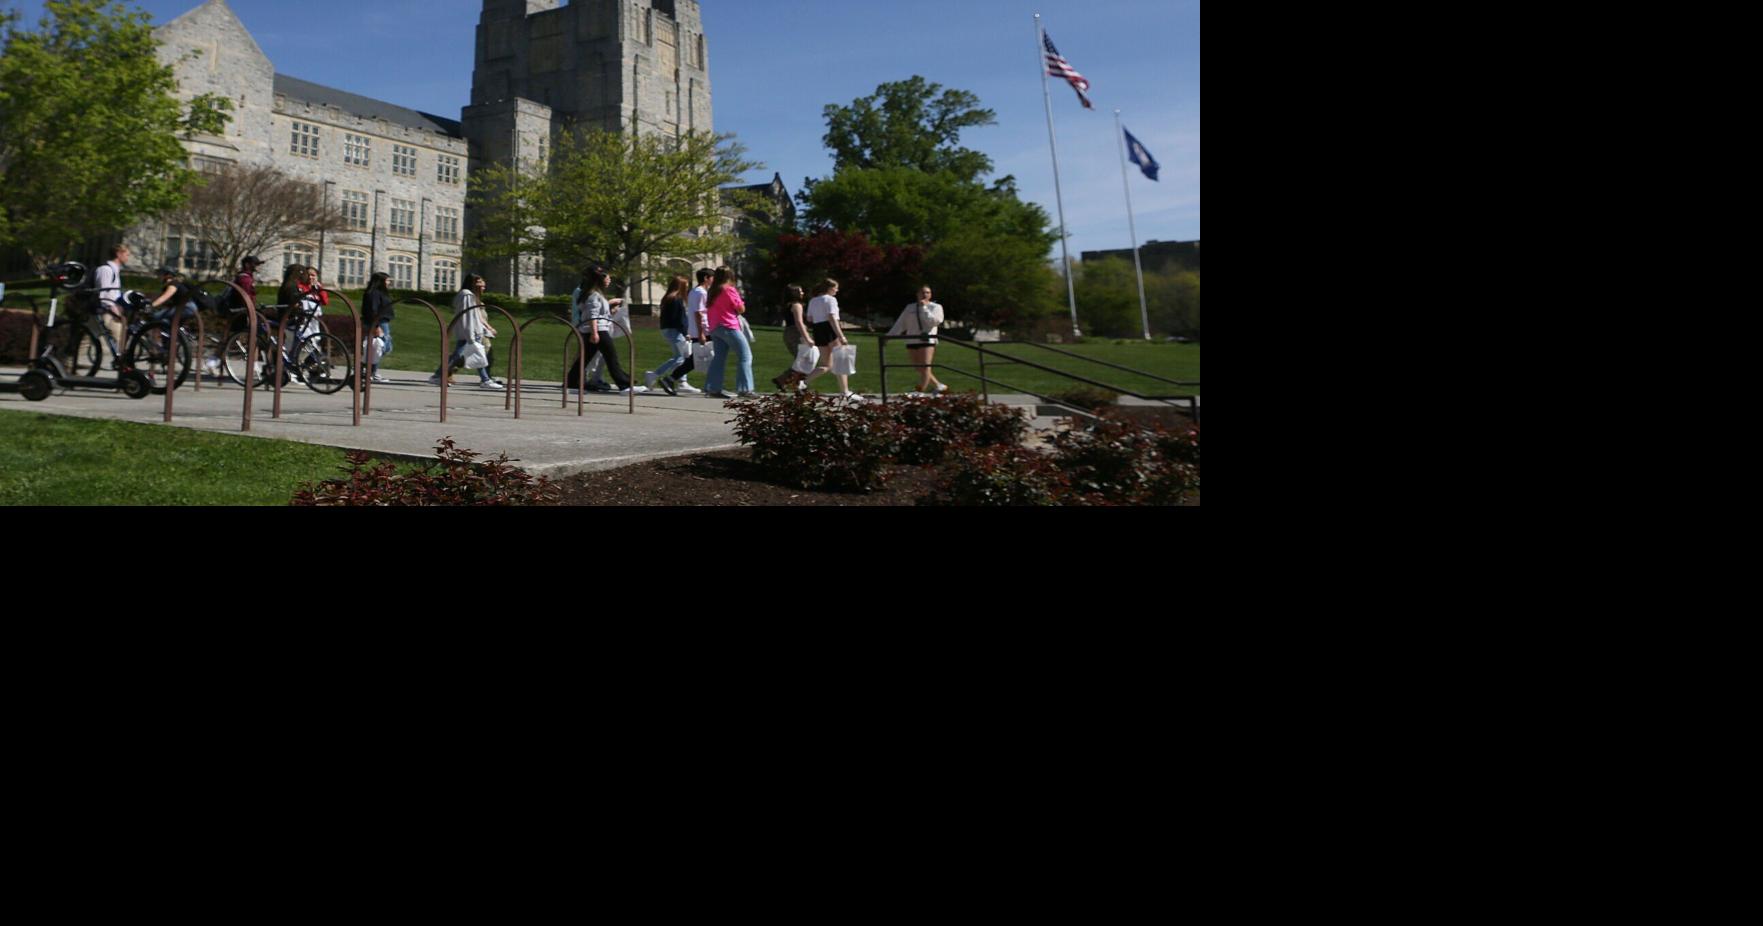 Virginia Tech passes William & Mary in top colleges ranking